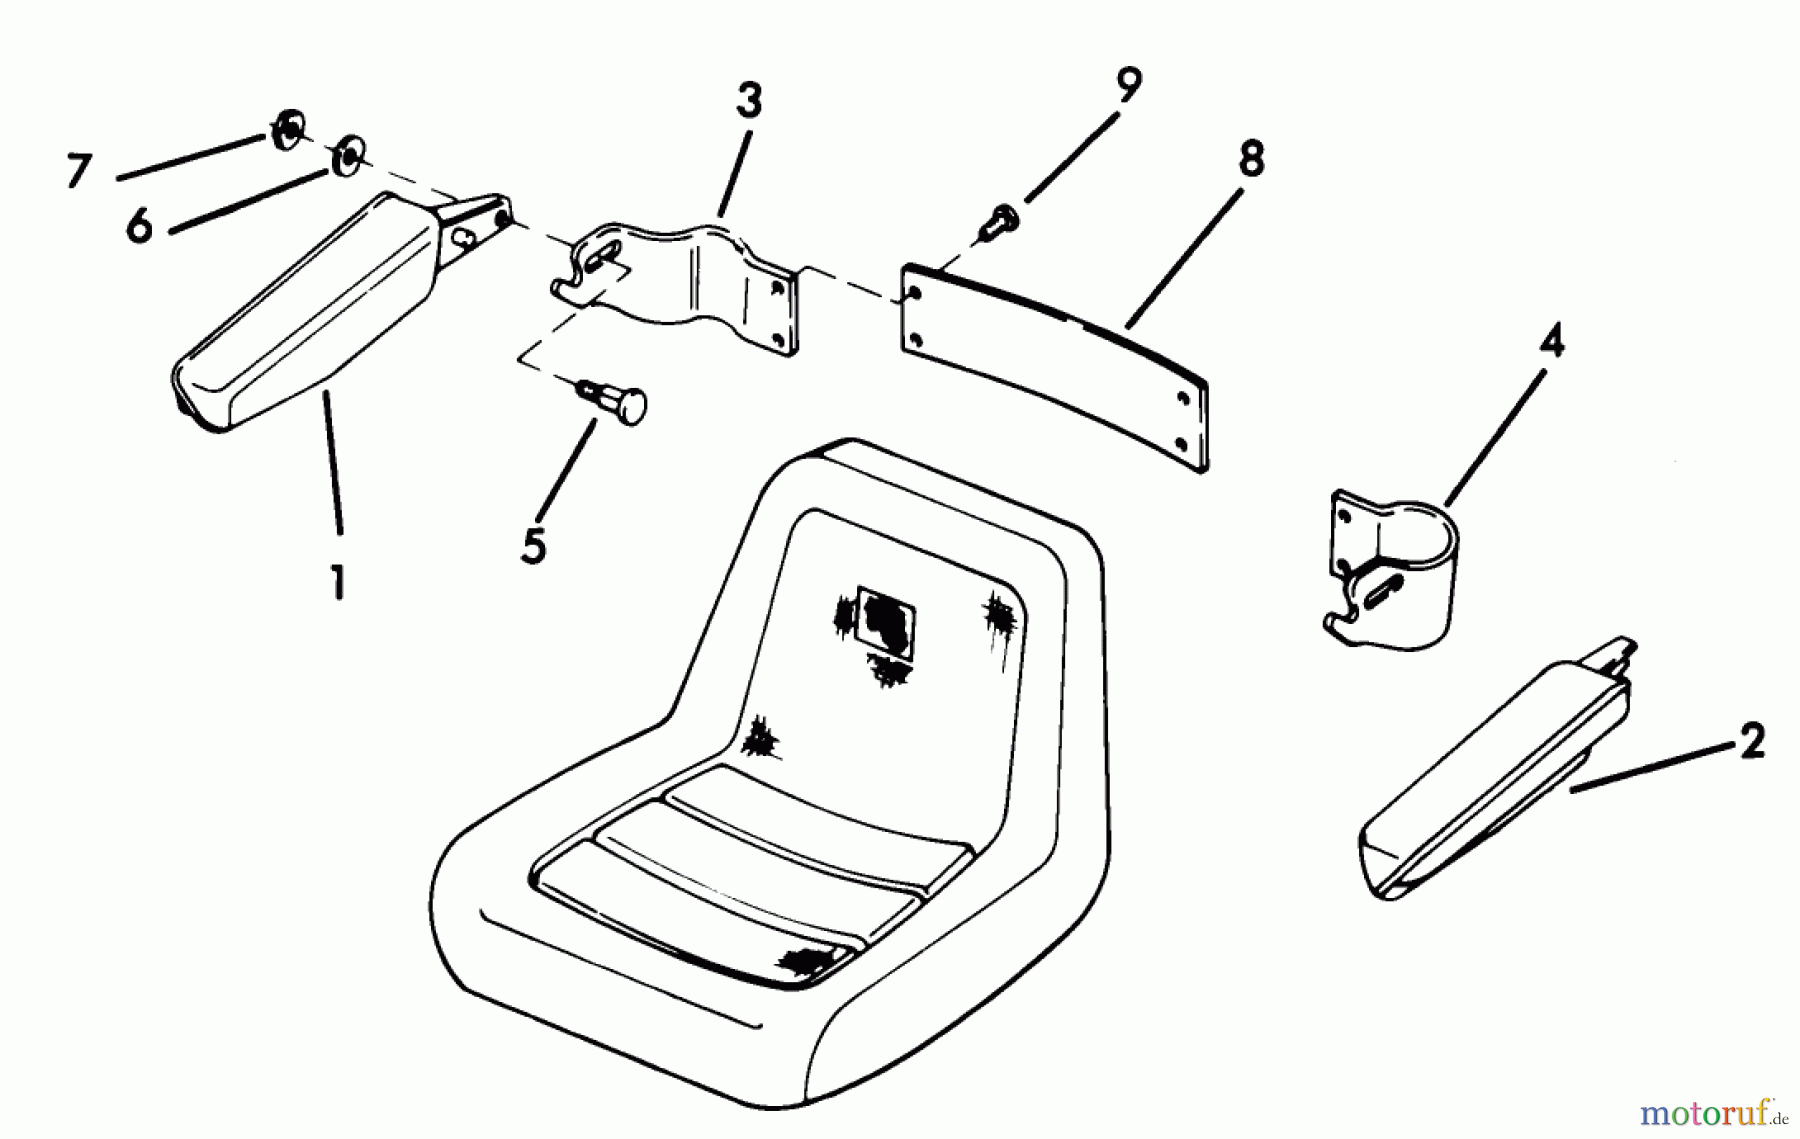  Toro Neu Accessories, Mower 82015 - Toro Arm Rest Kit, D-Series Tractor, 1977 PARTS LIST FOR ARM REST KIT (FACTORY ORDER NUMBER 8-2015)